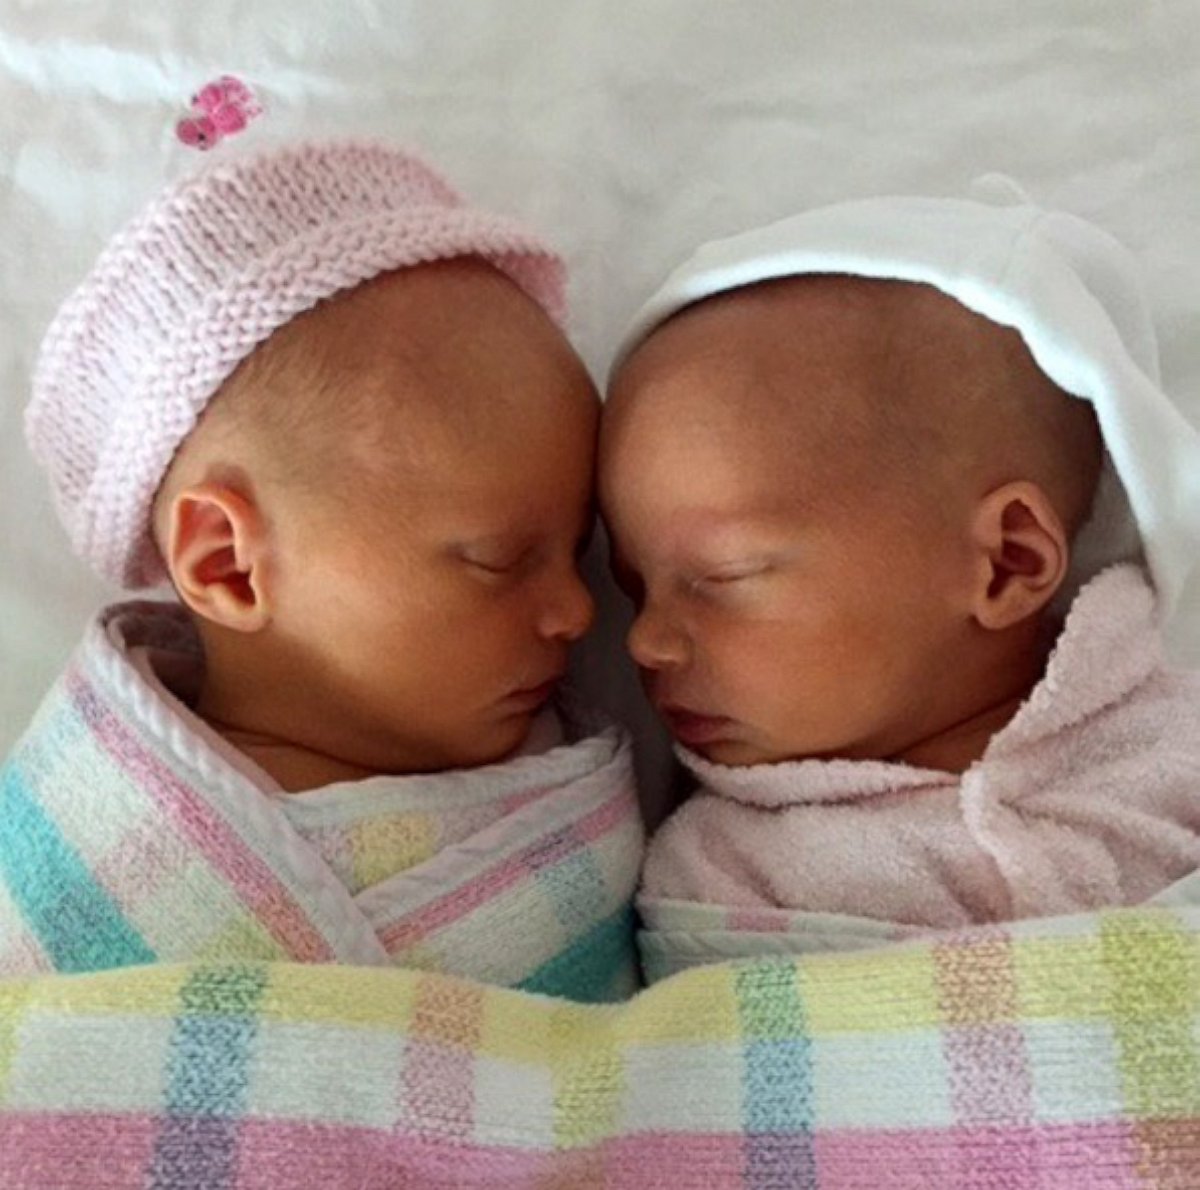 PHOTO: Simone Burstow of Brisbane, Australia, gave birth to her second set of identical triplets Sept. 4. The twins, Evie and Georgia, join brothers Harrison and Oliver, both 4, who were born May 15, 2012.